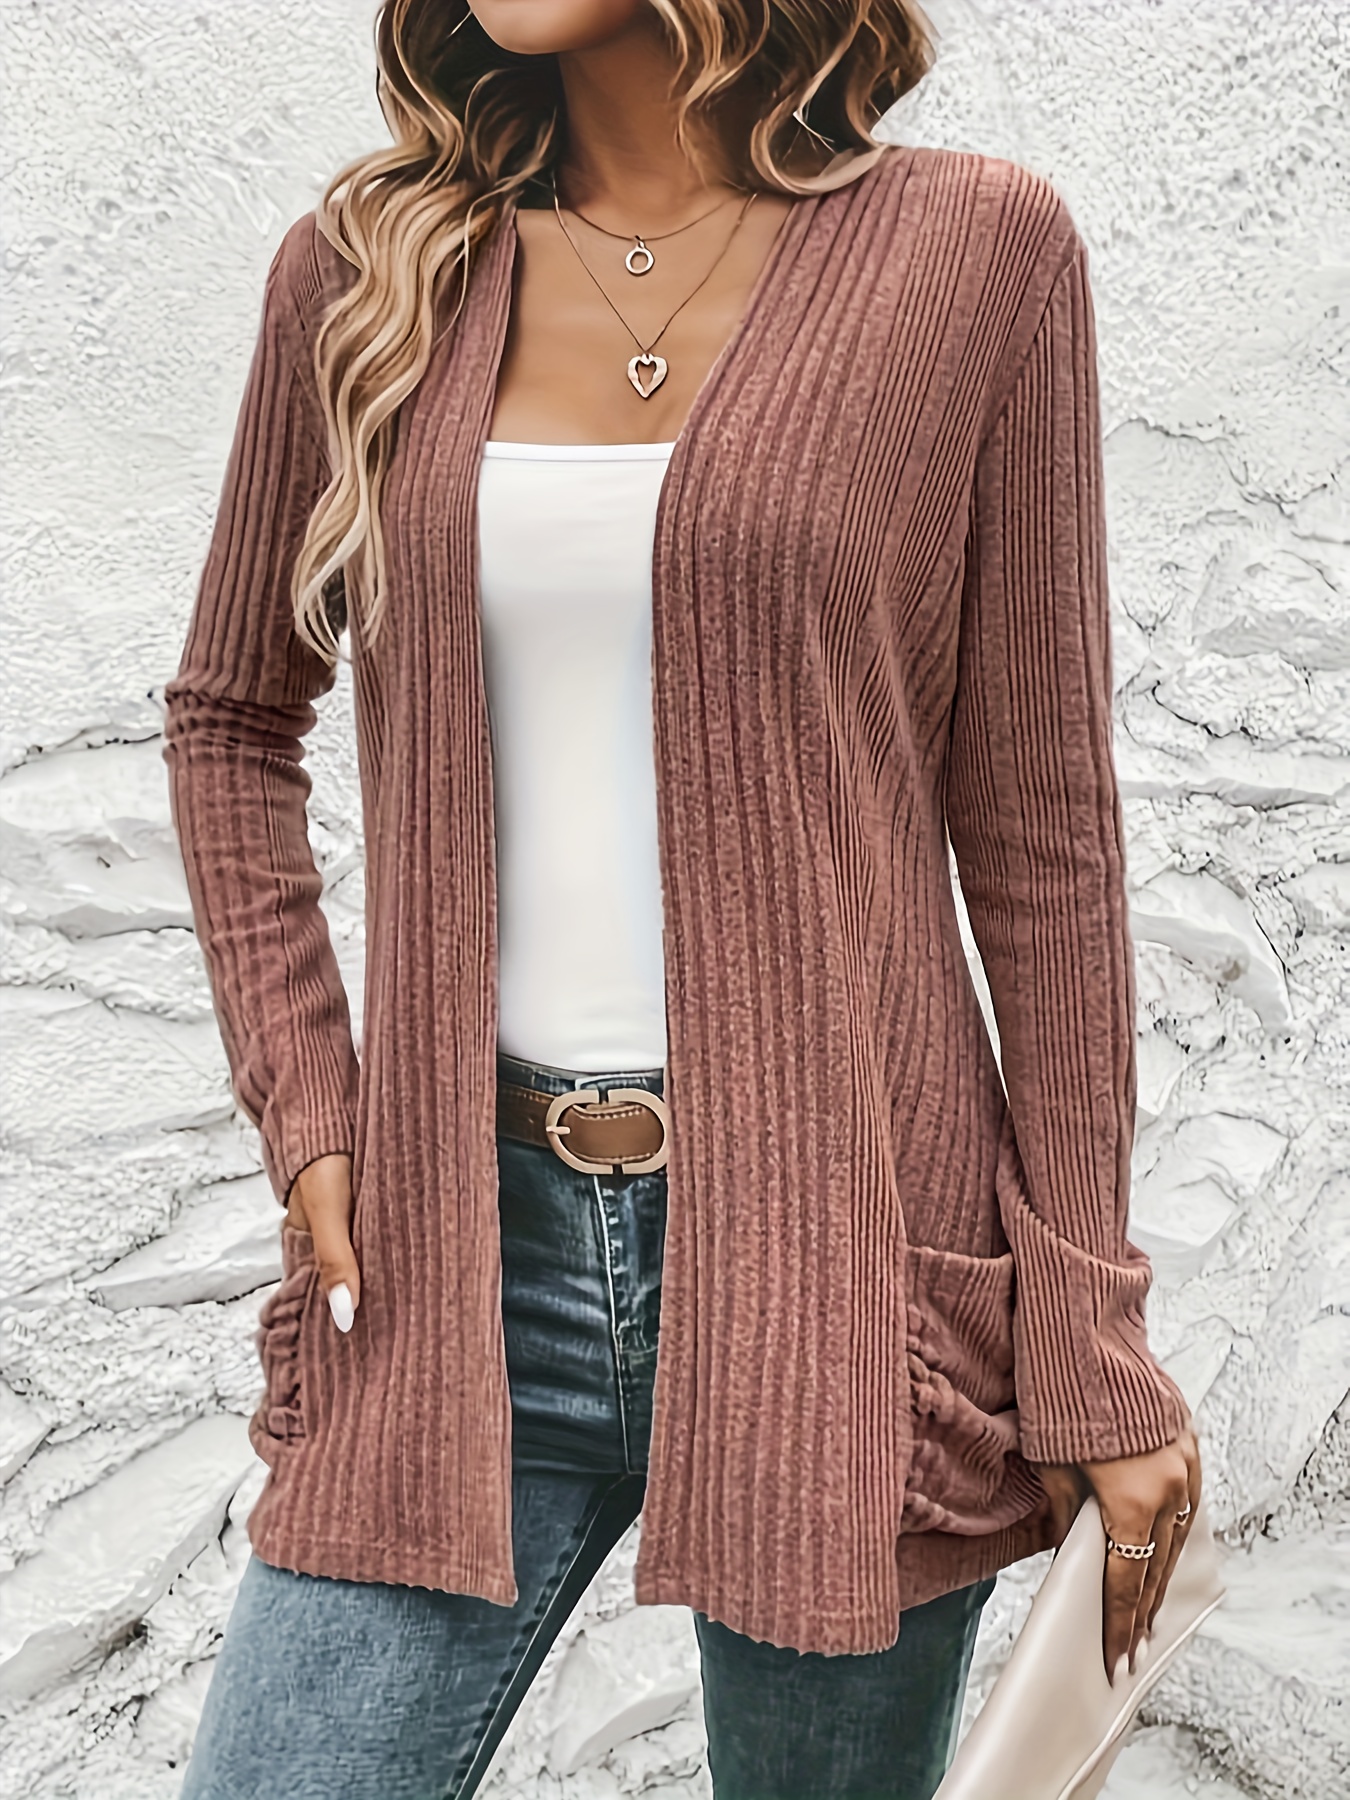 Clearance Items Women's Solid Color Loose Knitted Long Cardigan Sweater  With Pockets Womens Cardigans